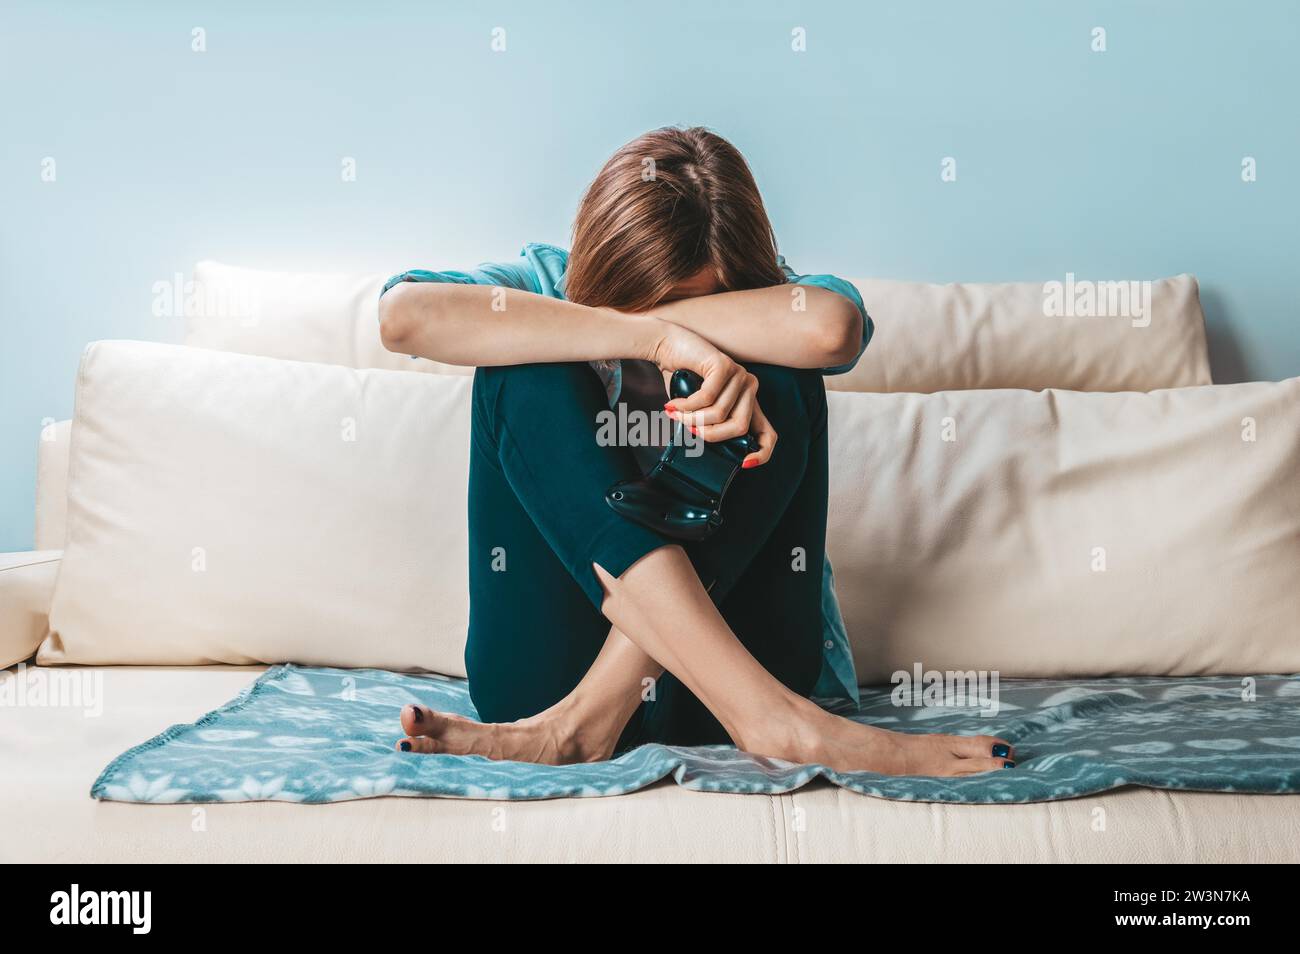 Girl with a joystick in her hands cries because of a defeat in the game. ESports concept. Mixed media Stock Photo